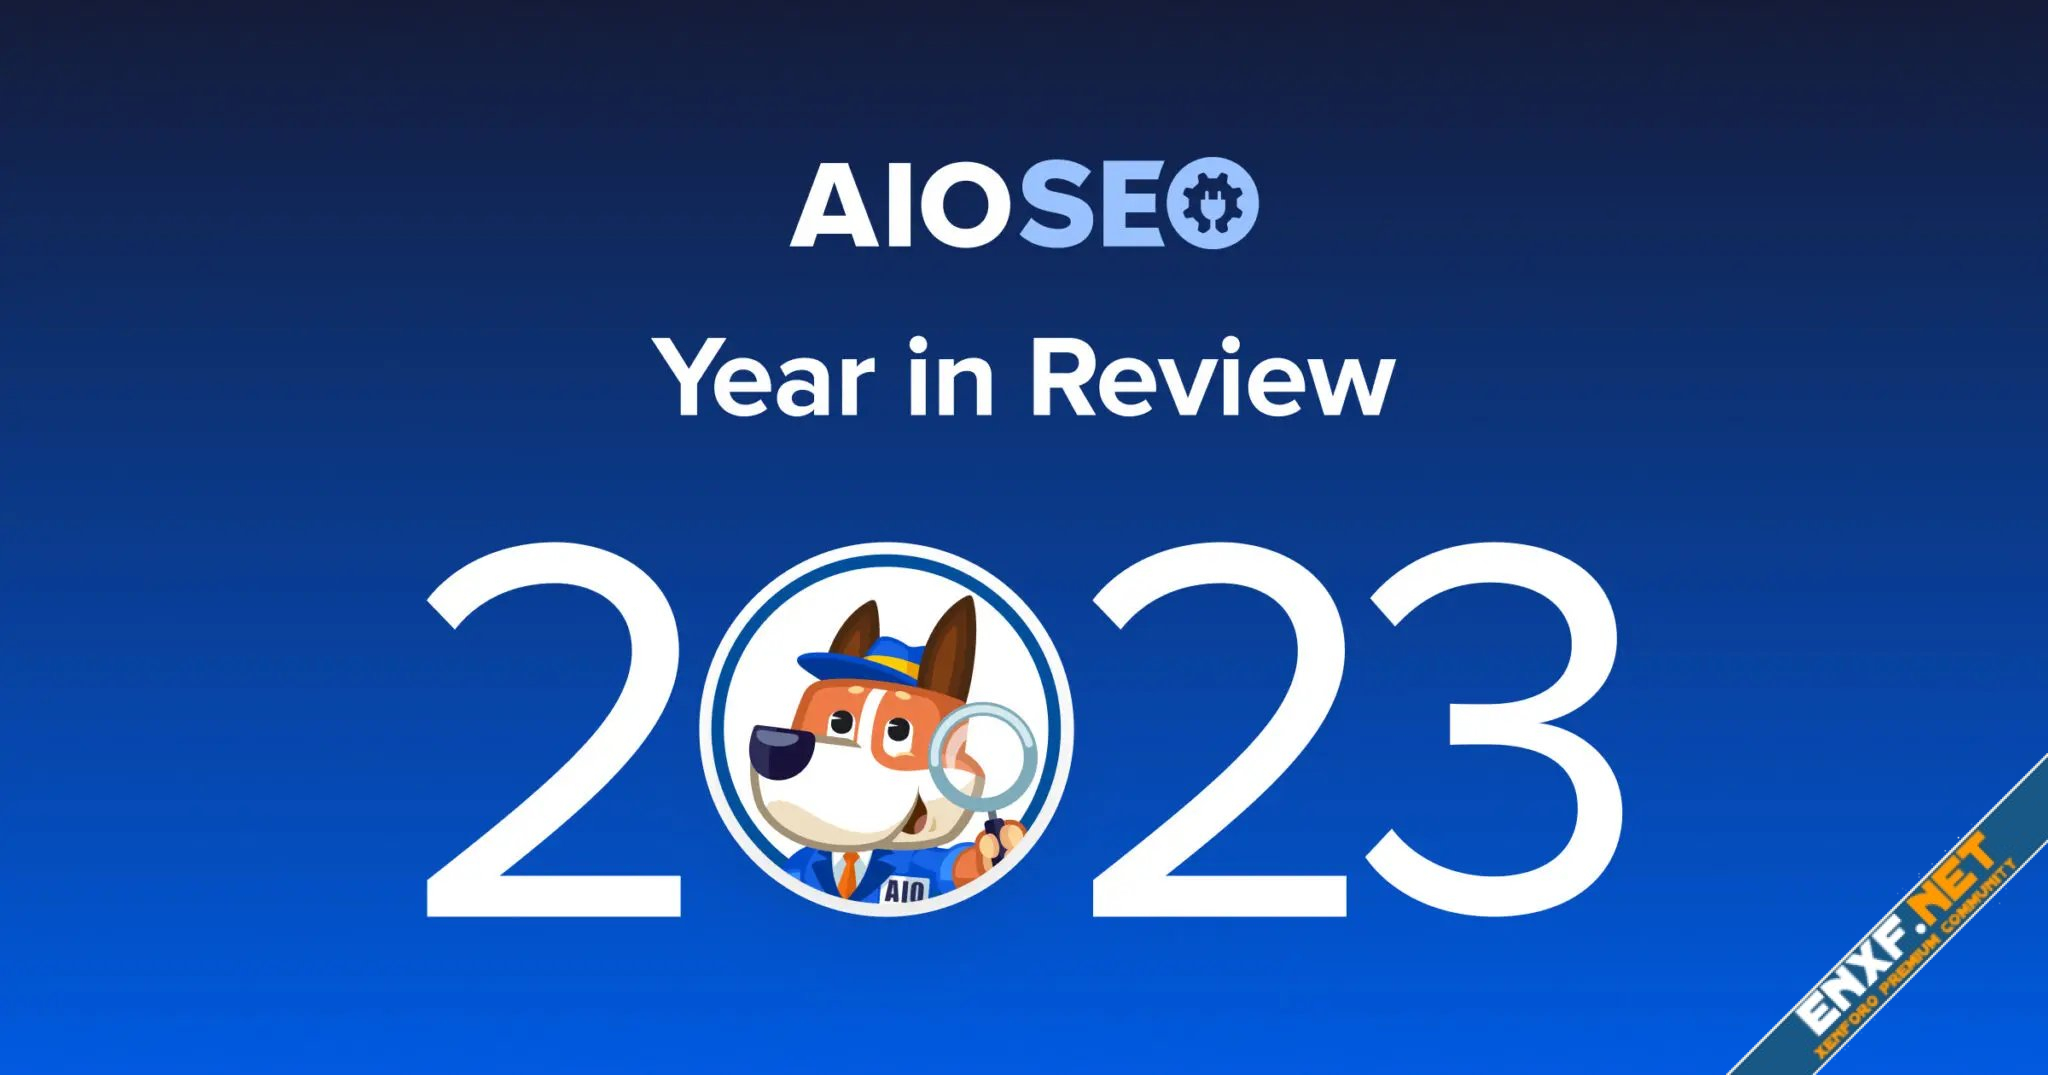 1 - aioseo-2023-year-in-review-2048x1075.jpg.jpg